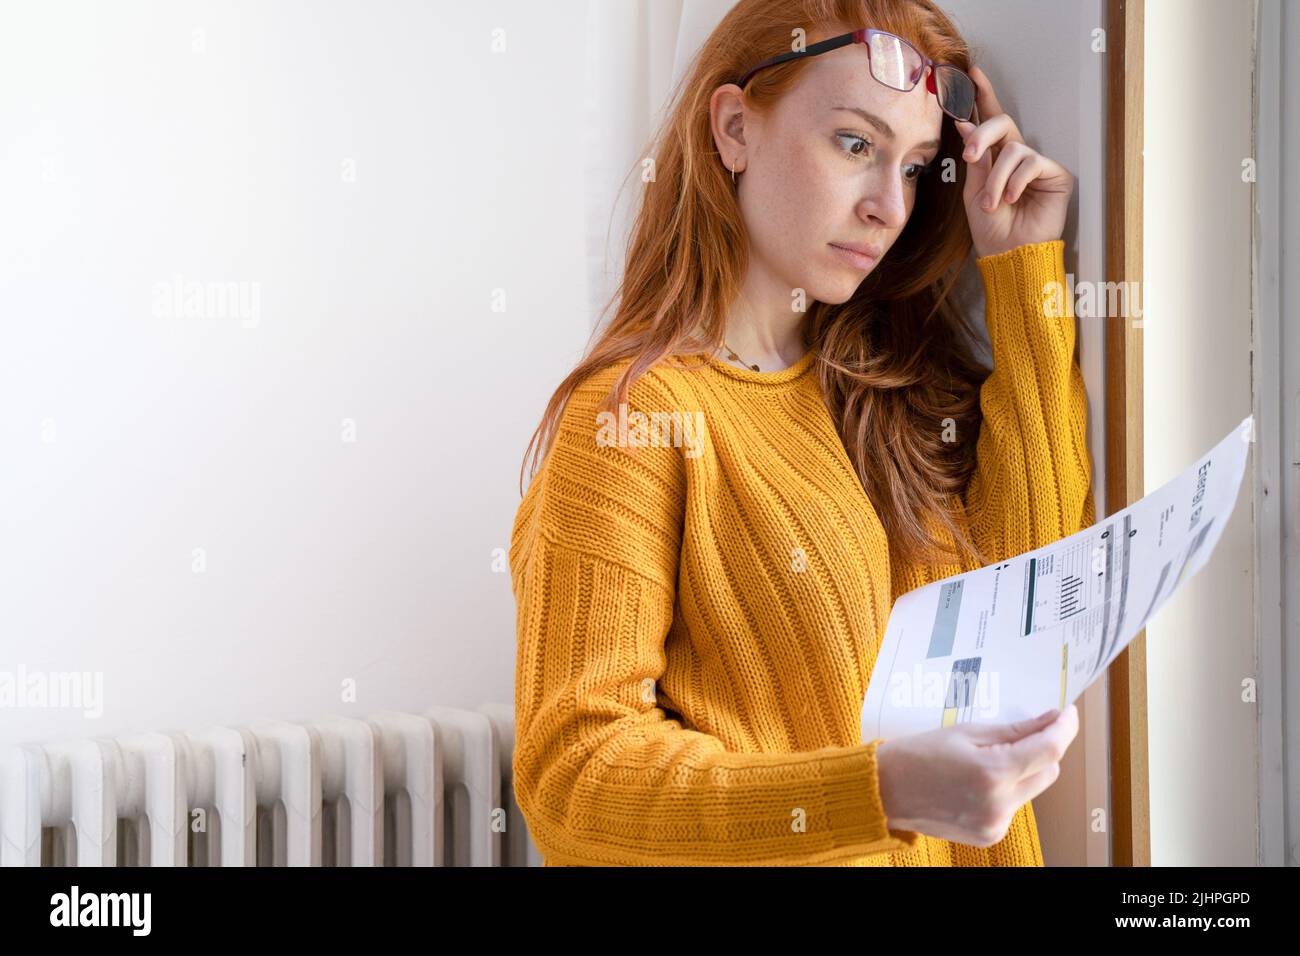 One person worried about energy bills cost having heating problem Stock Photo